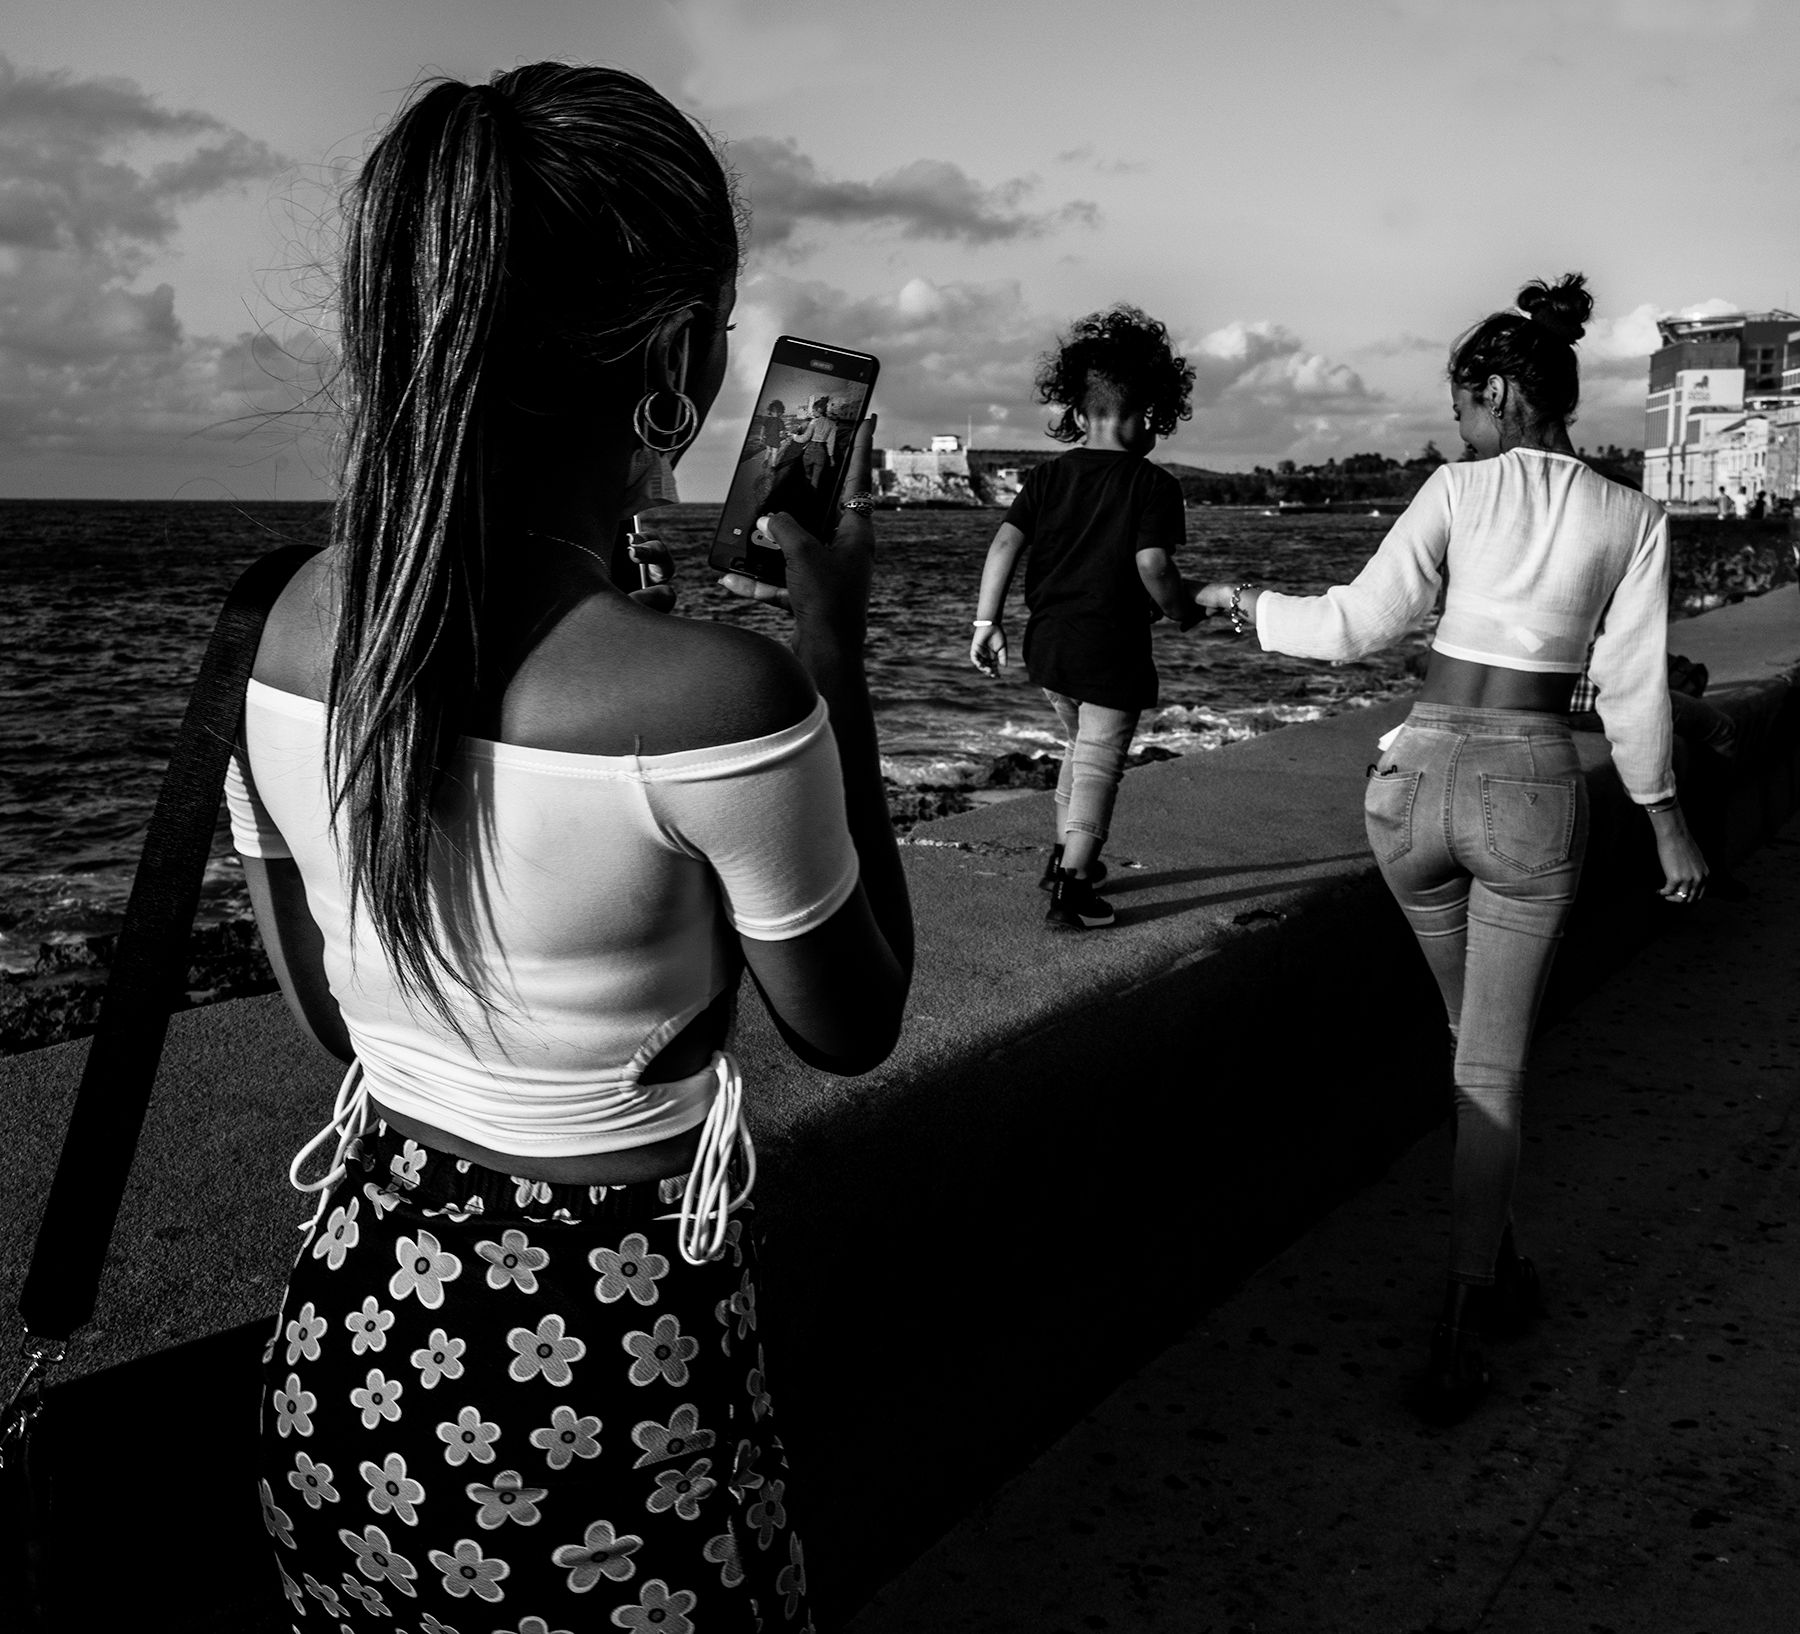 Walking on the Malecon